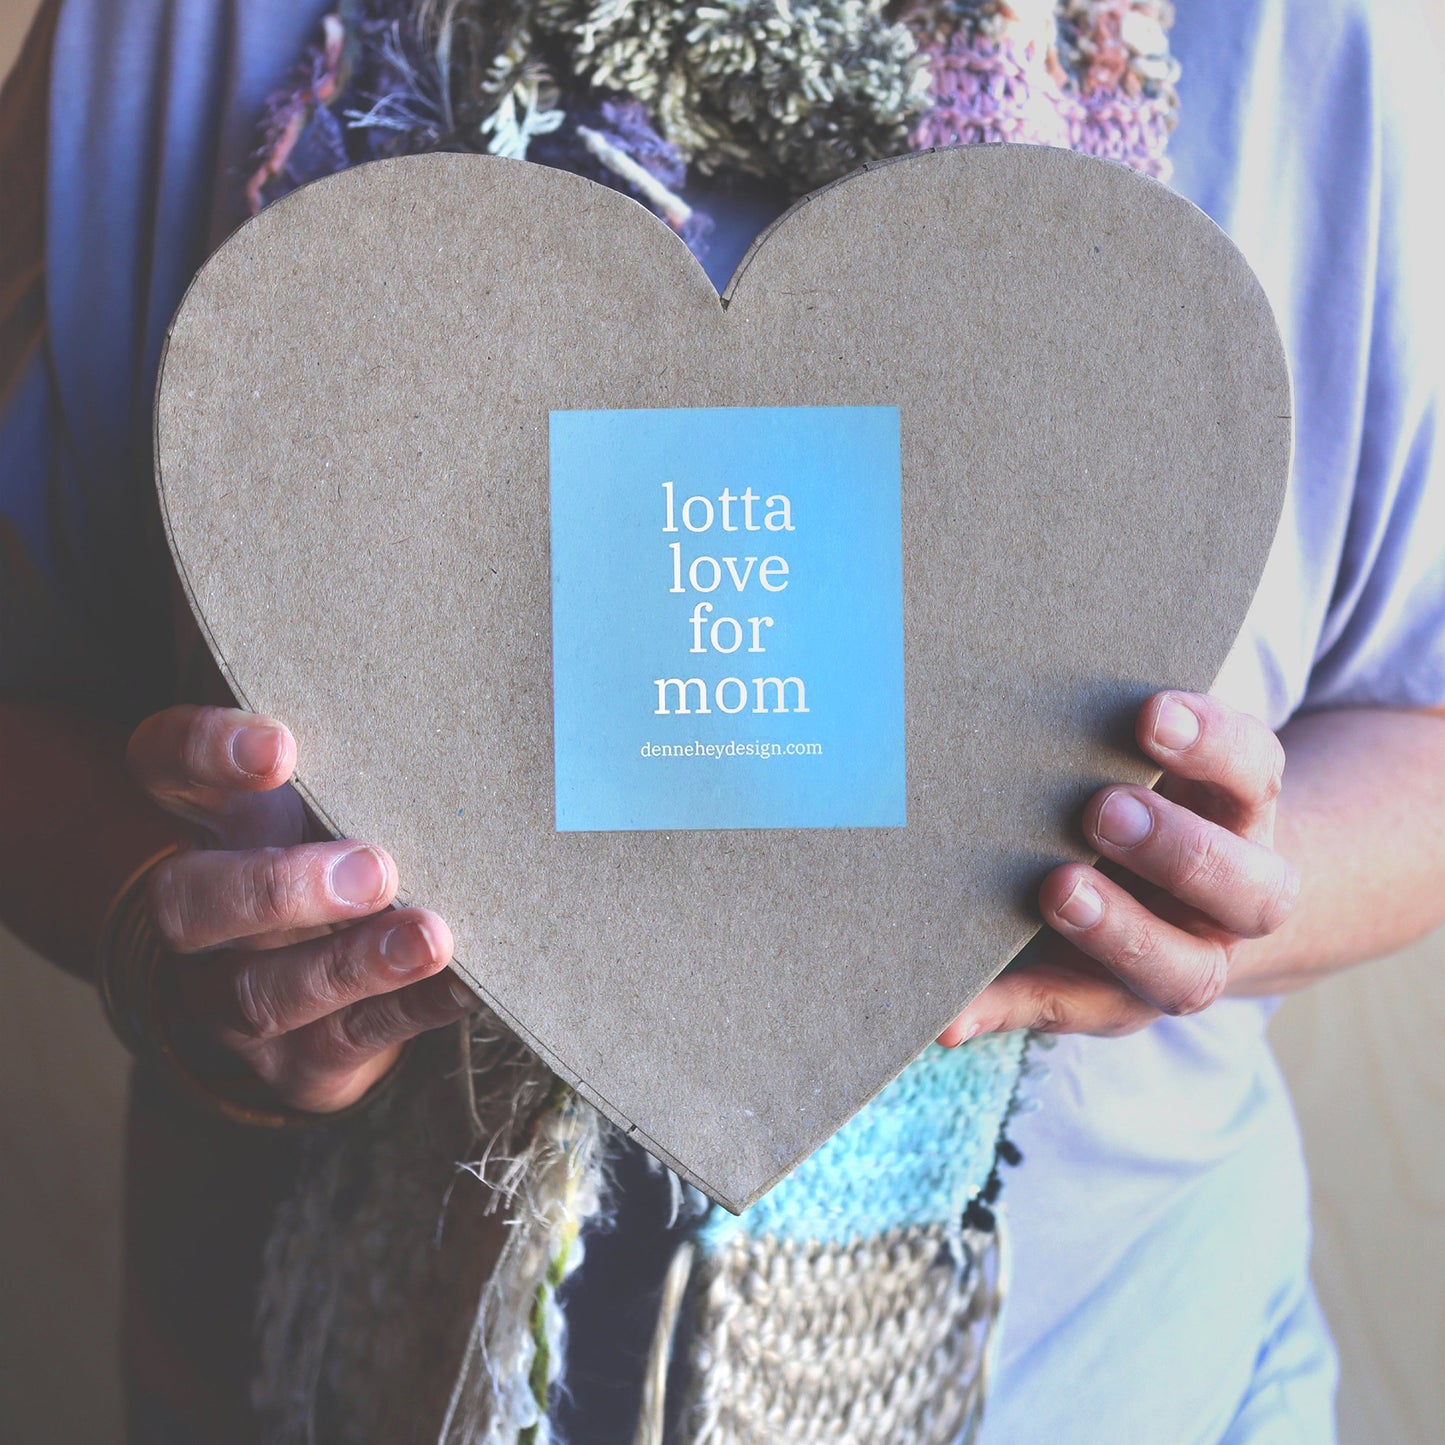 Mother's Day Heart Gift Box